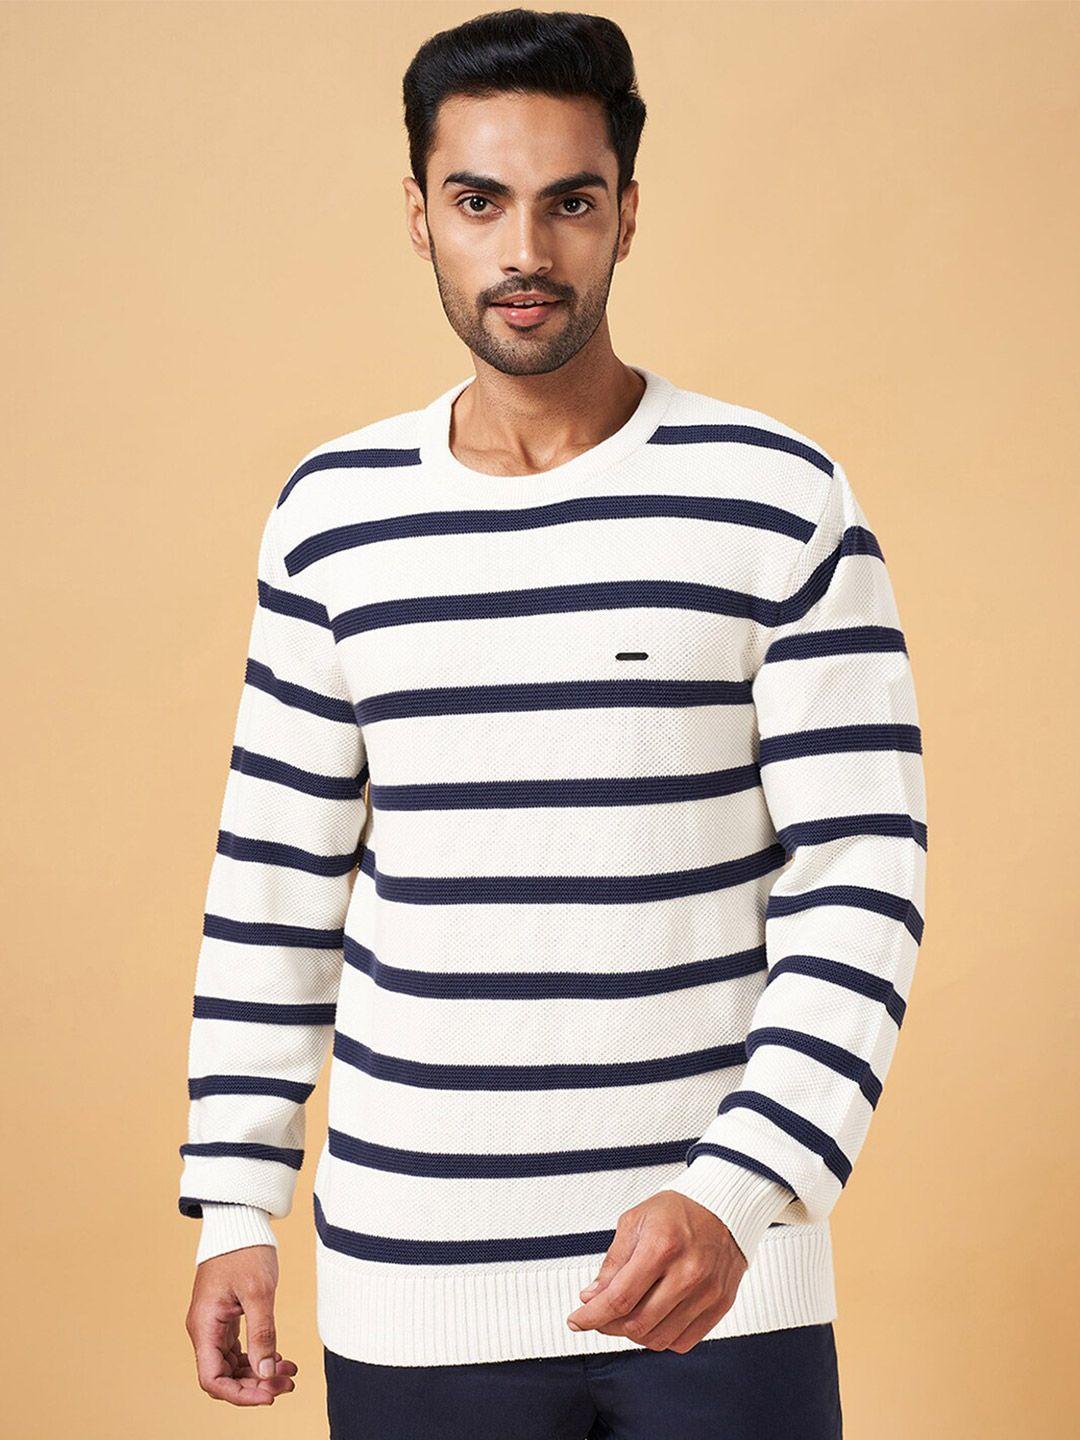 byford by pantaloons striped pullover sweatshirt